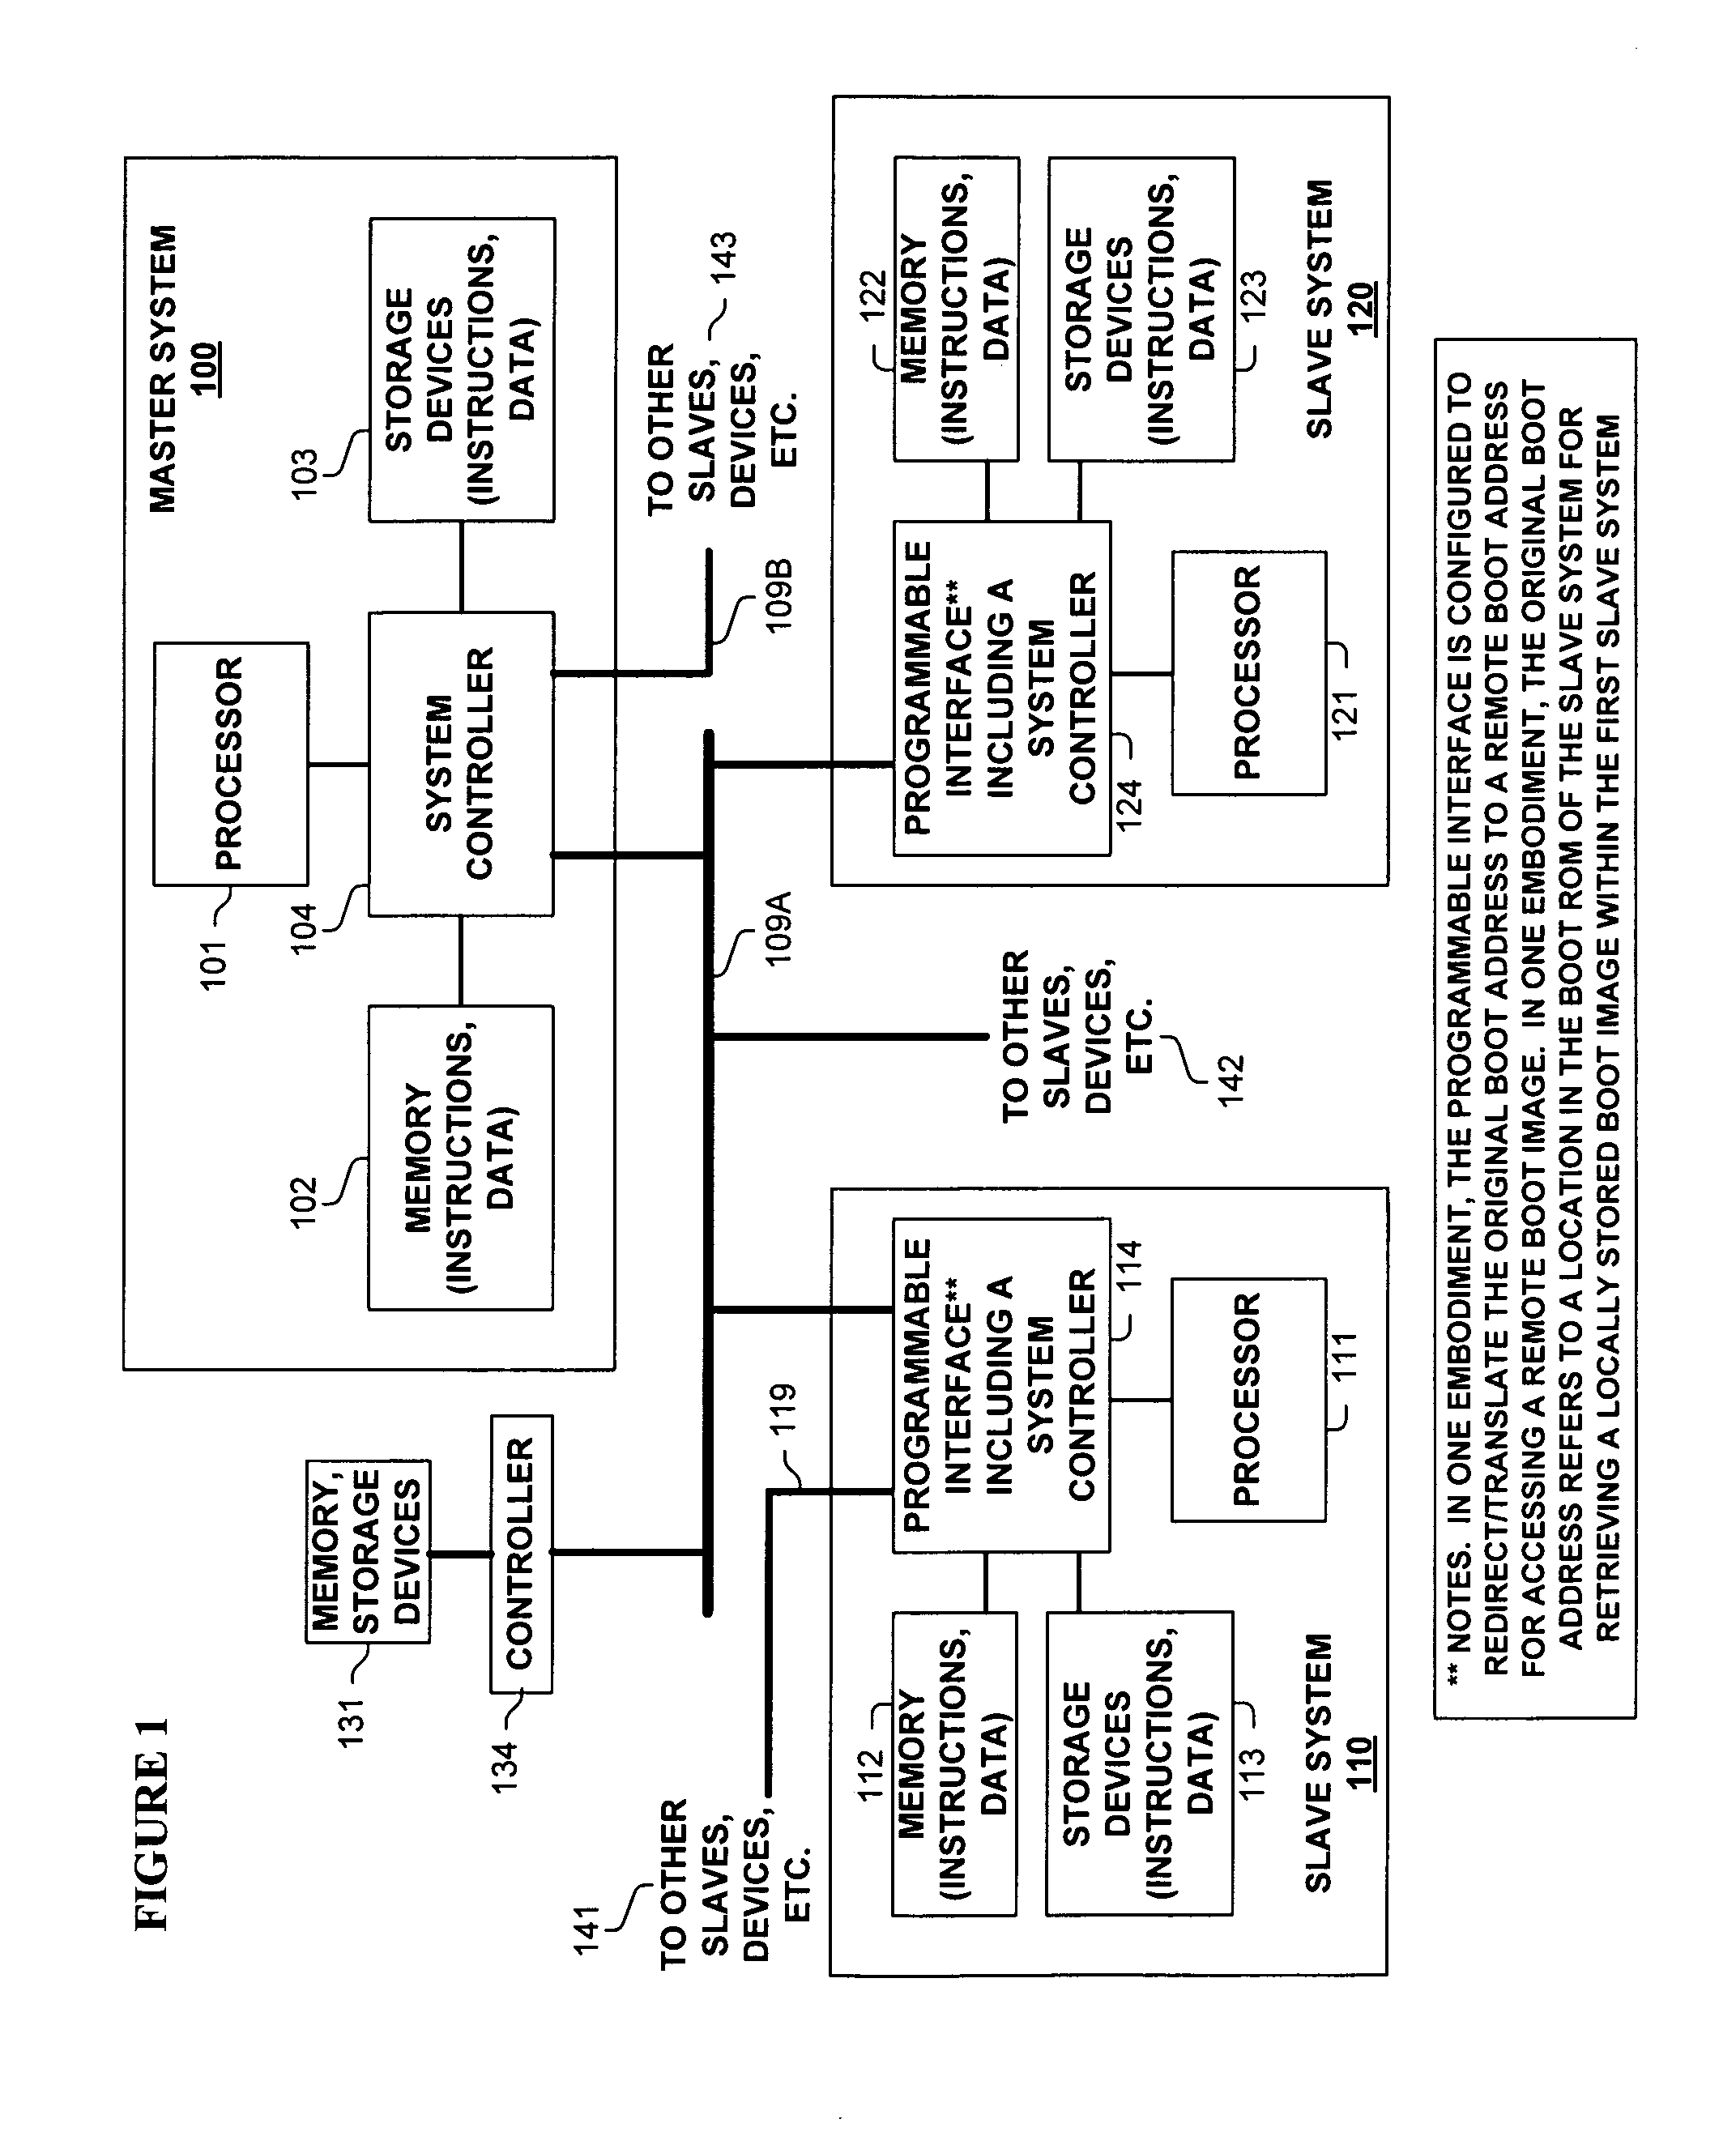 Method and apparatus for redirecting the boot operations of one or more systems